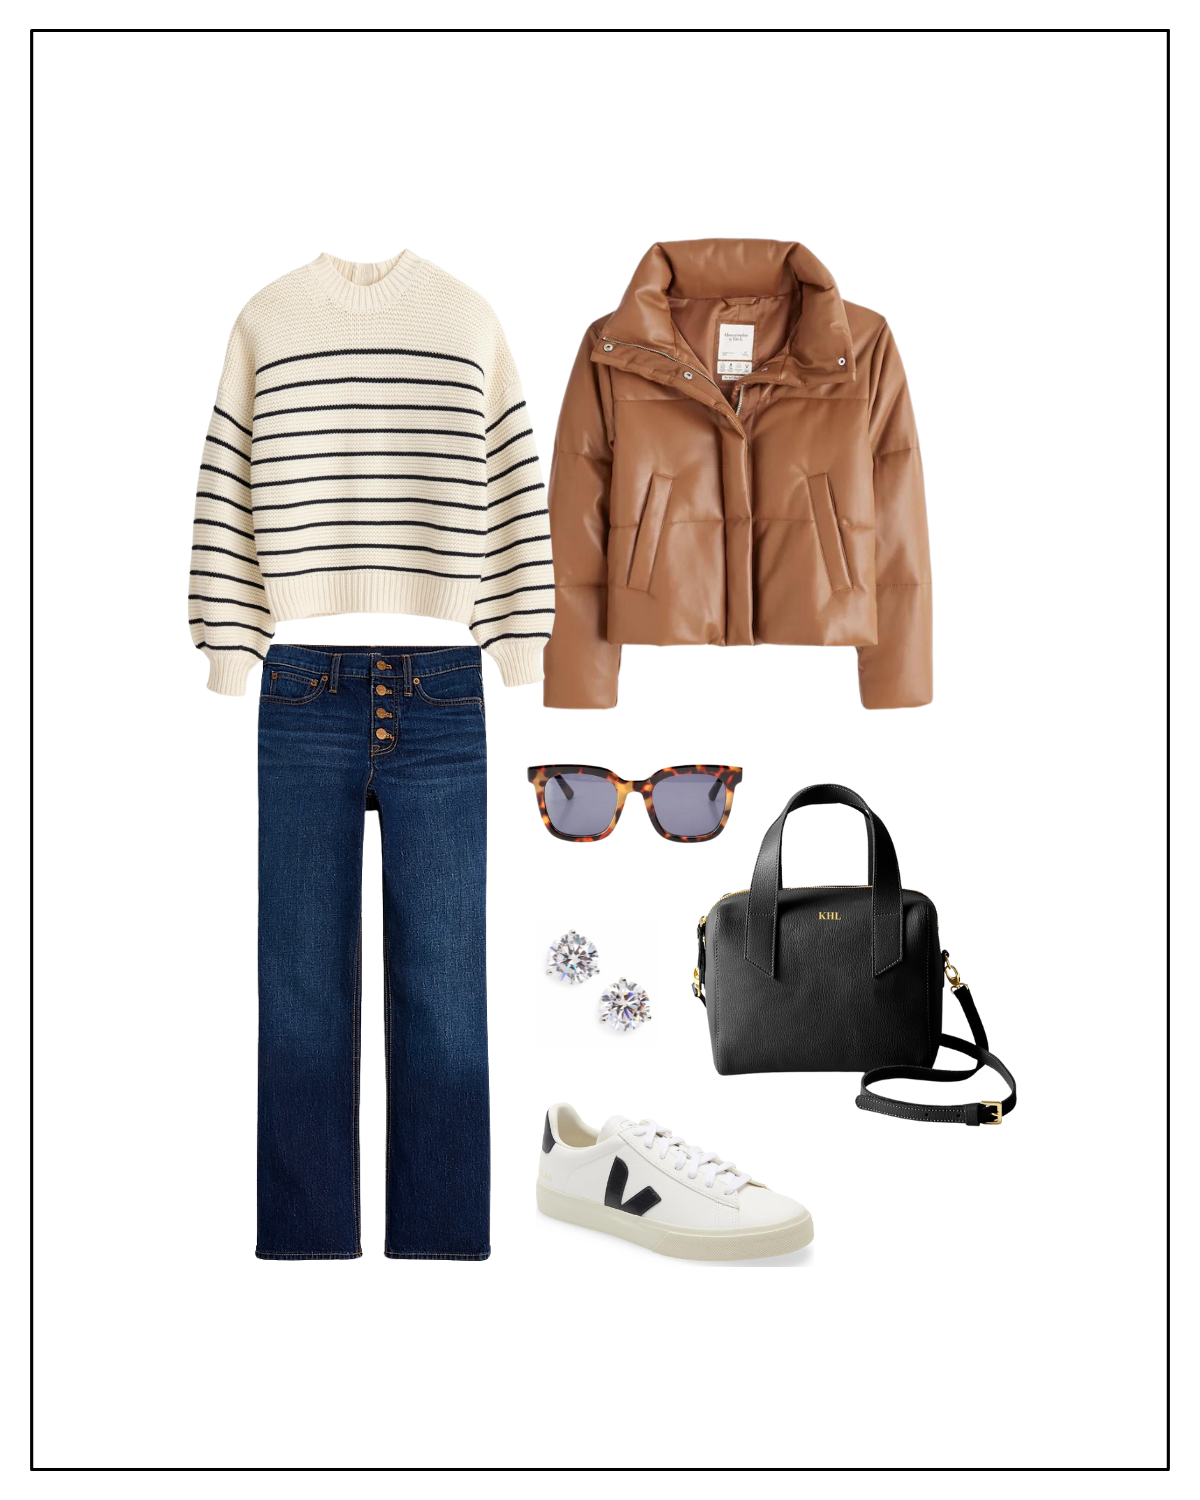 How to Style a Striped Sweater